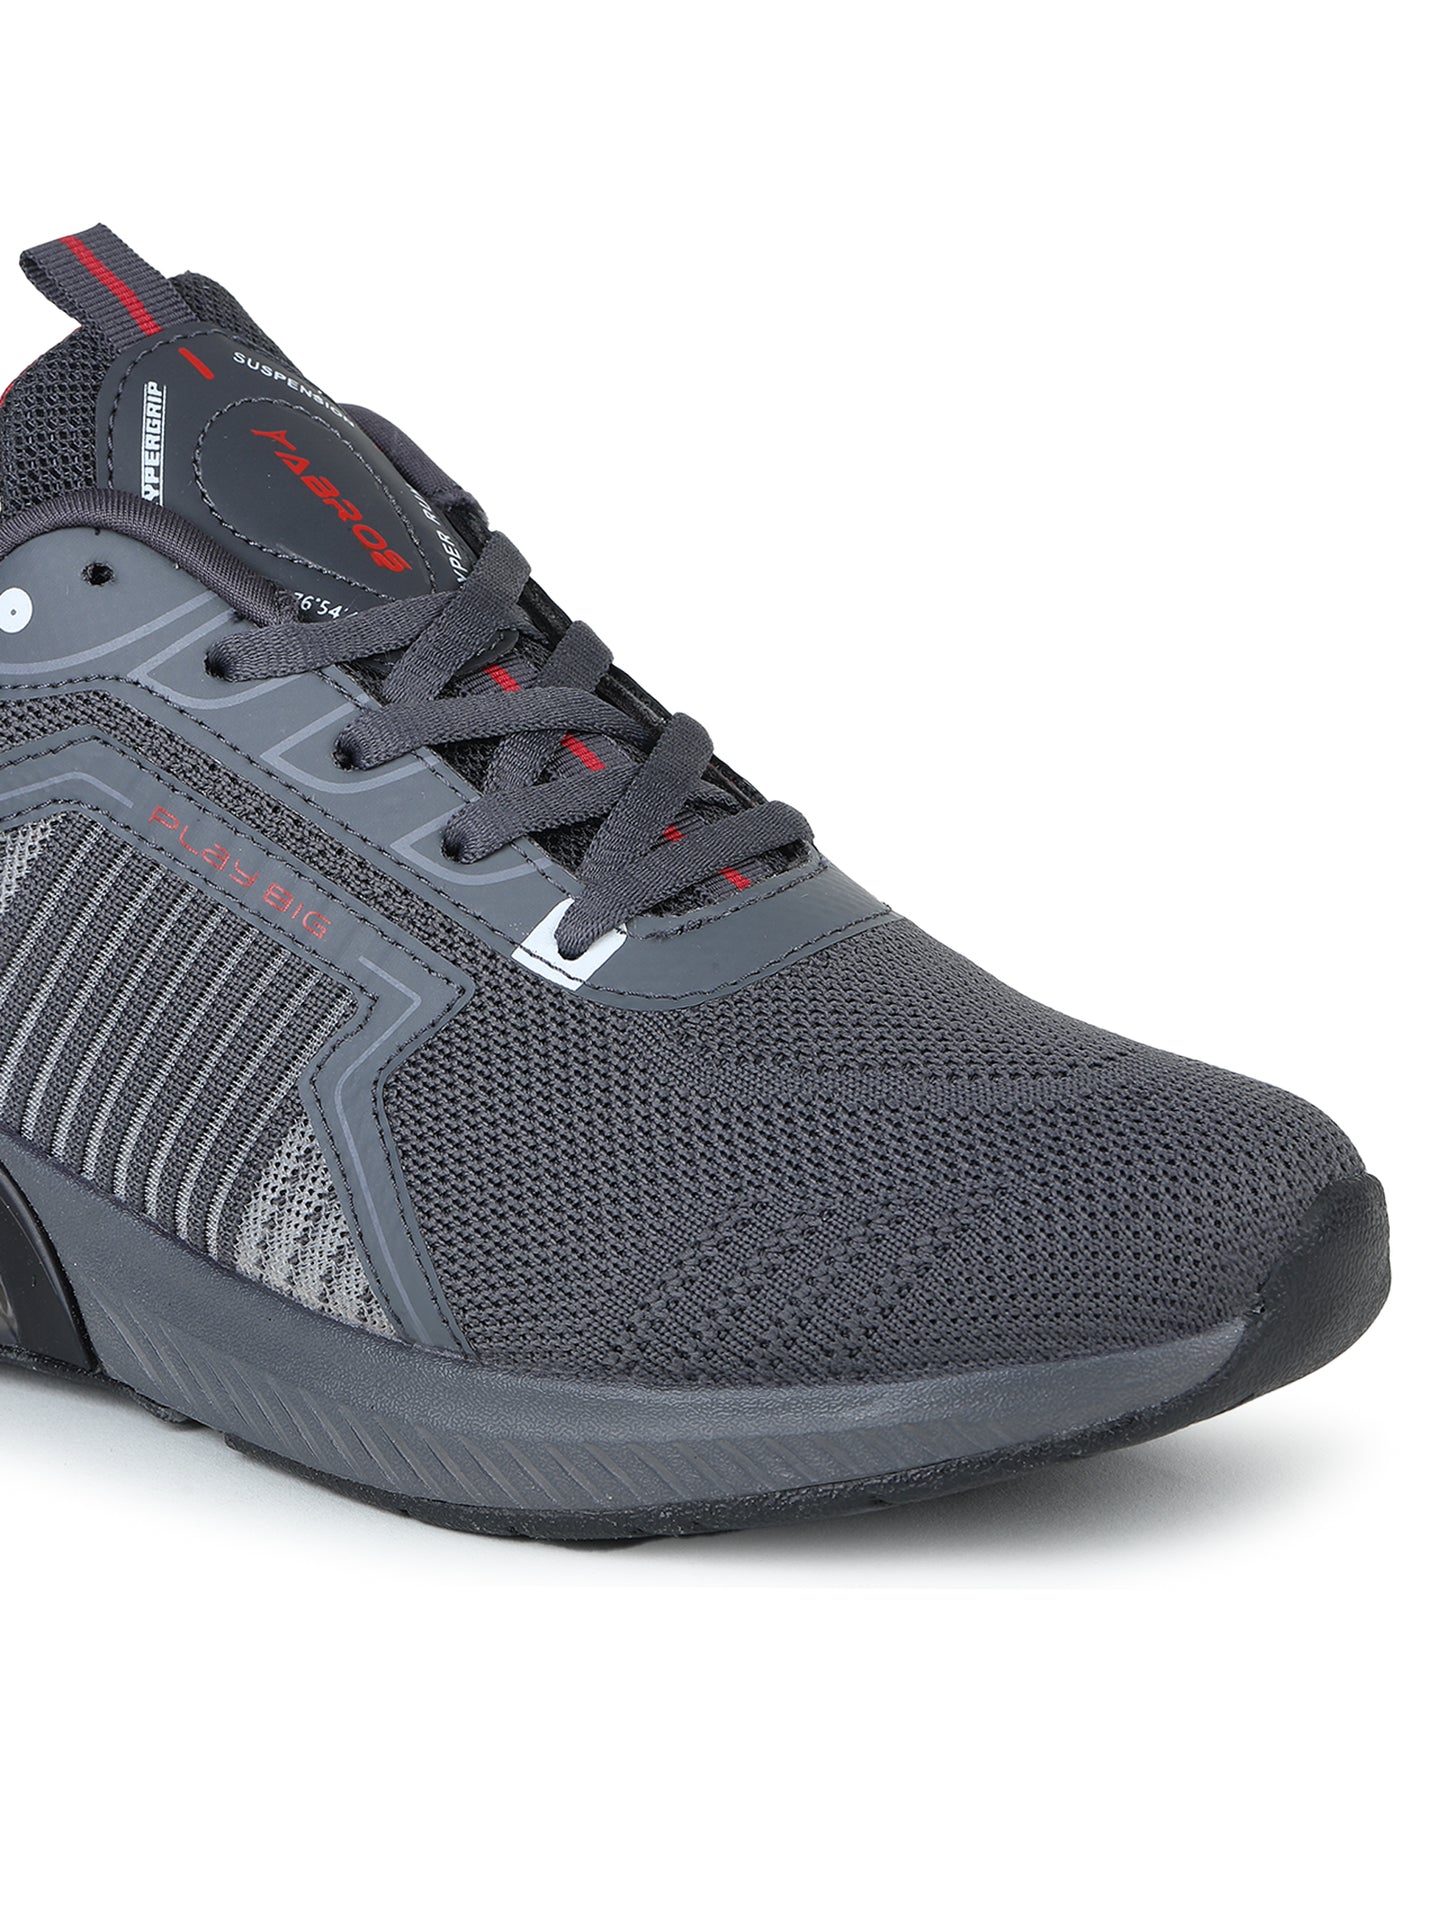 ABROS  THOR RUNNING SPORTS SHOES FOR MEN